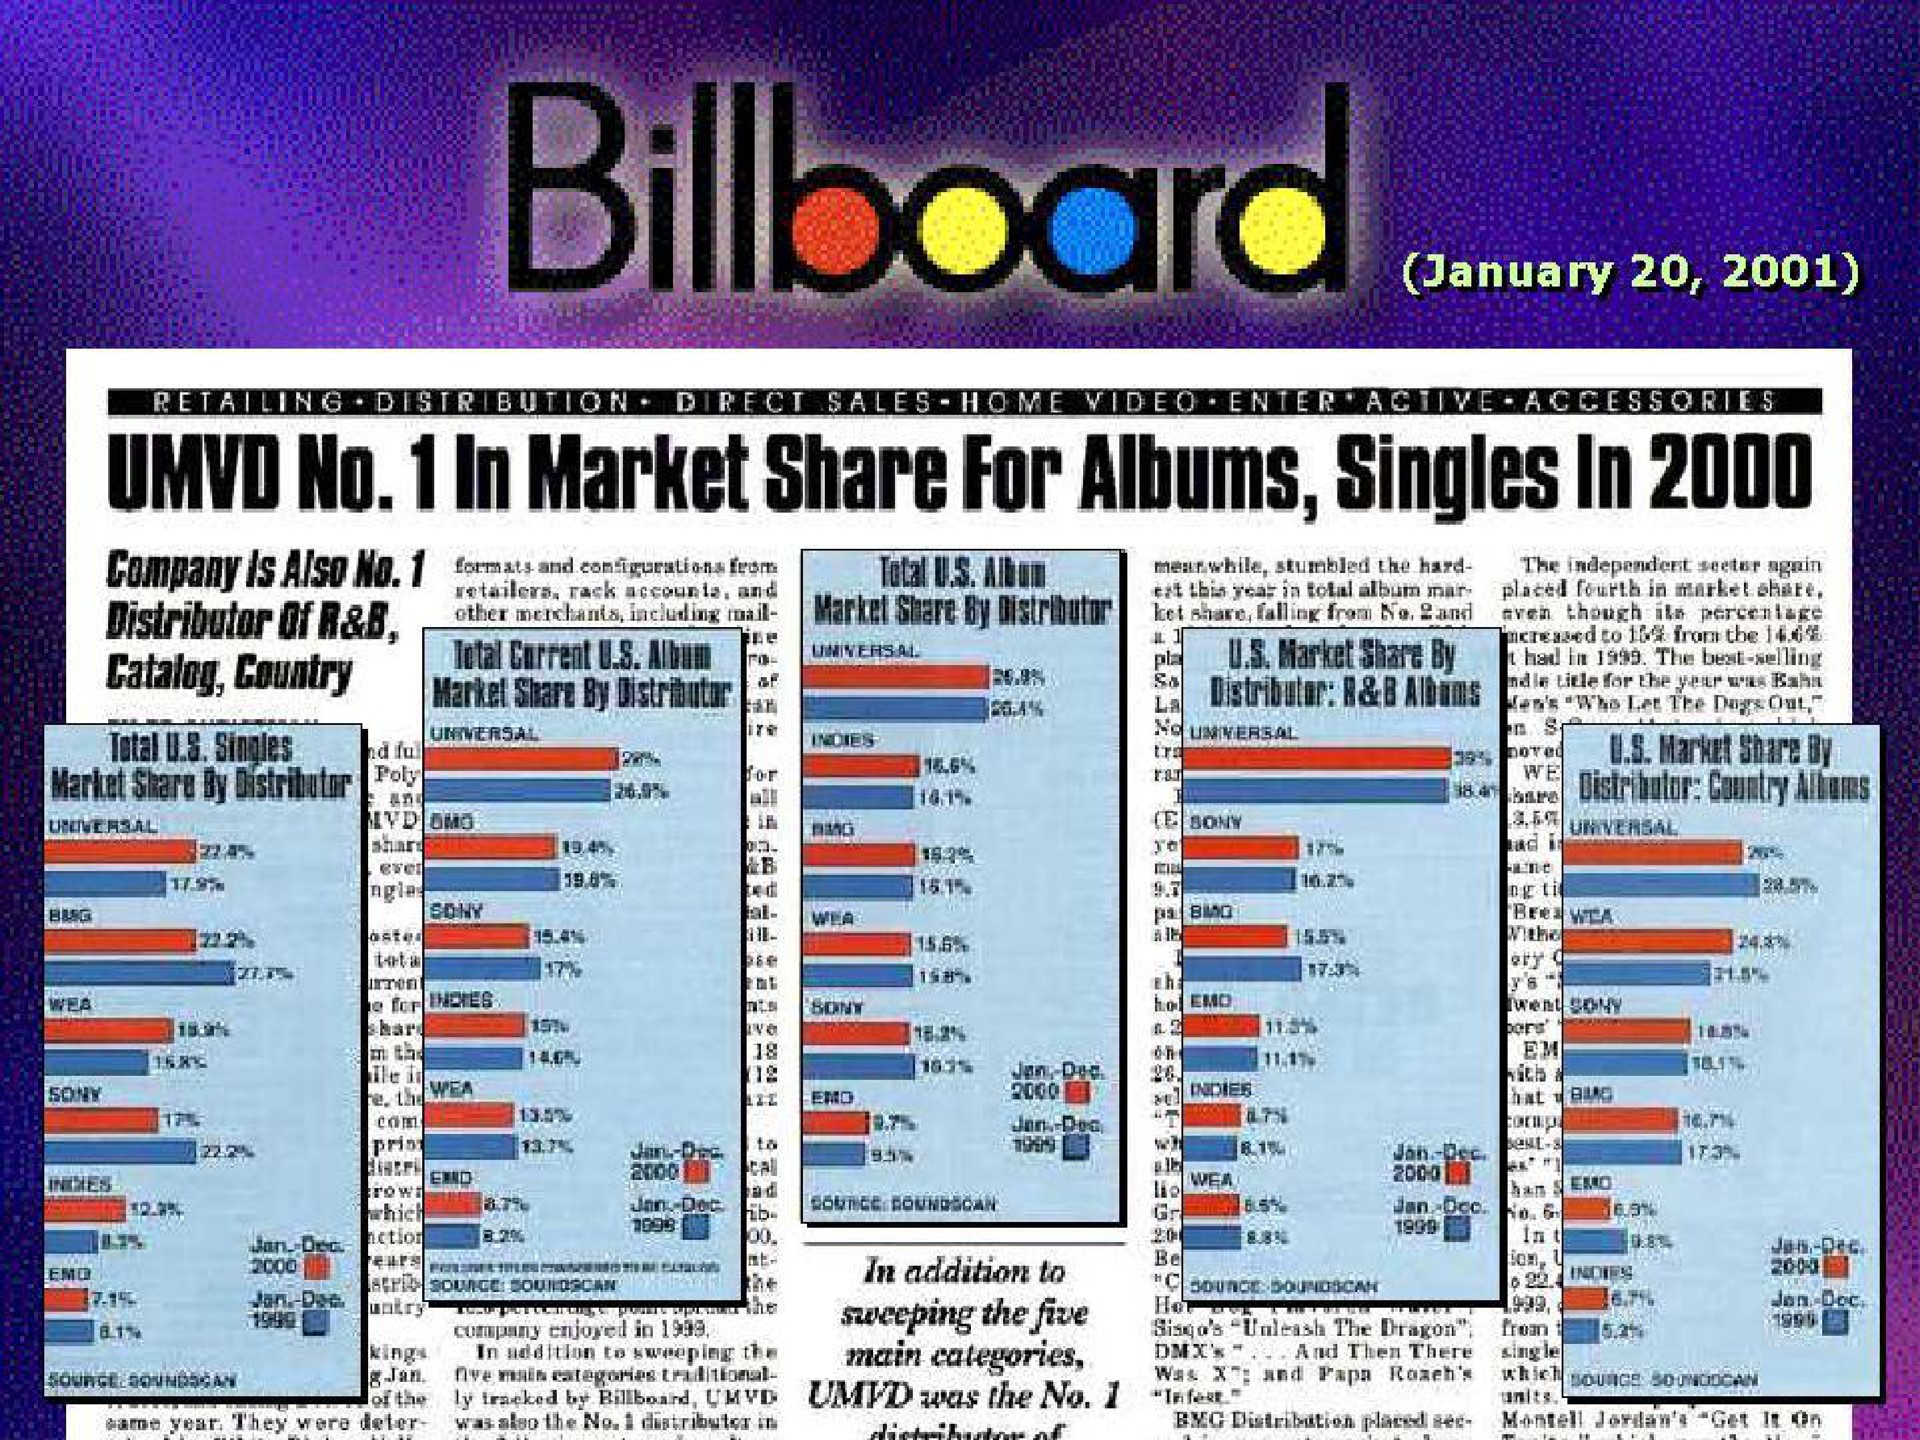 no in market share for albums singles in | Universal Music Group